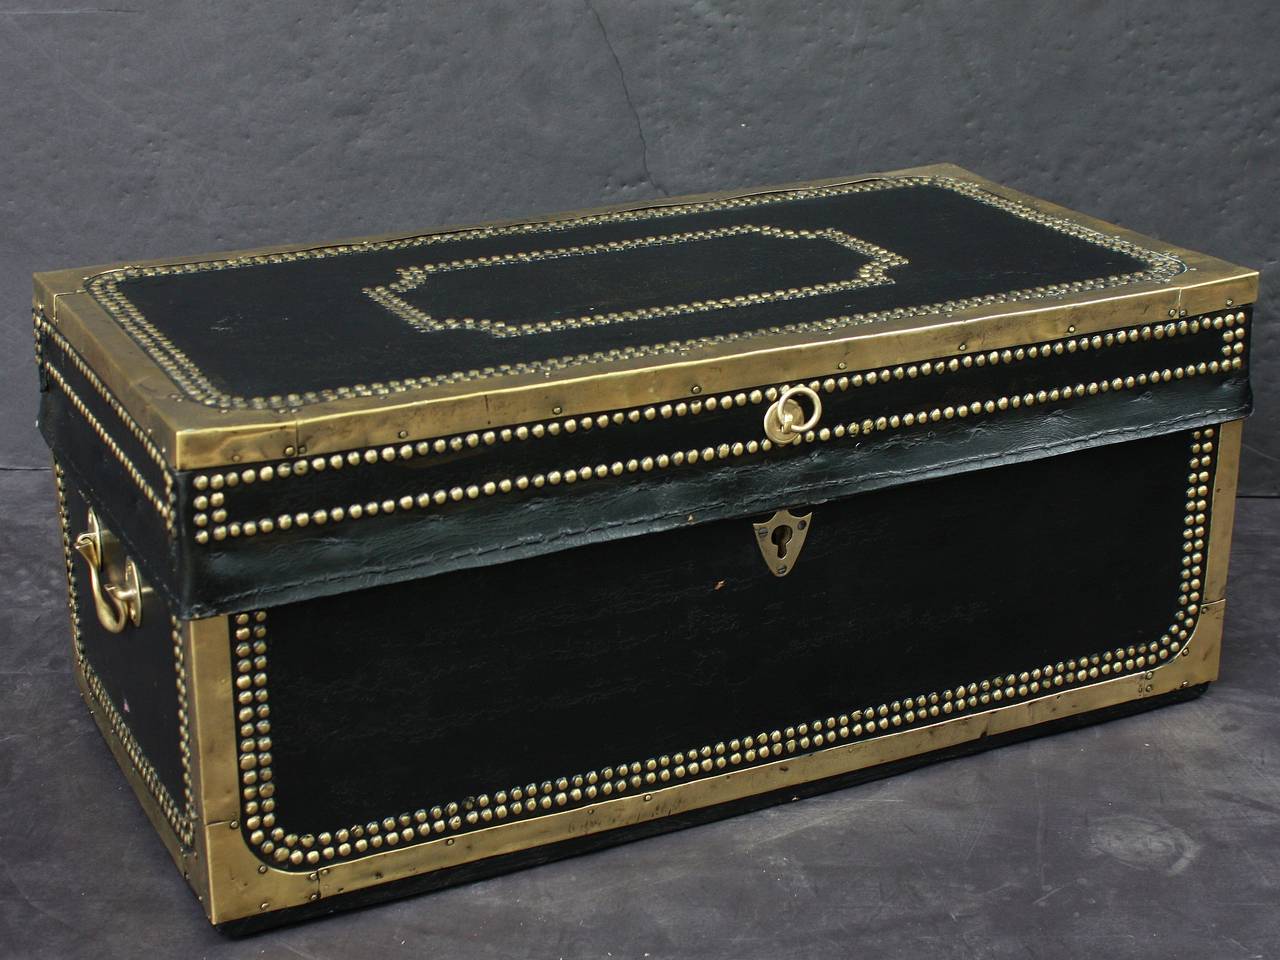 A handsome medium-sized British officer's military Campaign camphor trunk or chest of brass-bound and studded leather over camphor wood, circa 1820. 
Manufactured by the Dutch East India Company for an officer to carry his kit on Campaign. 
With